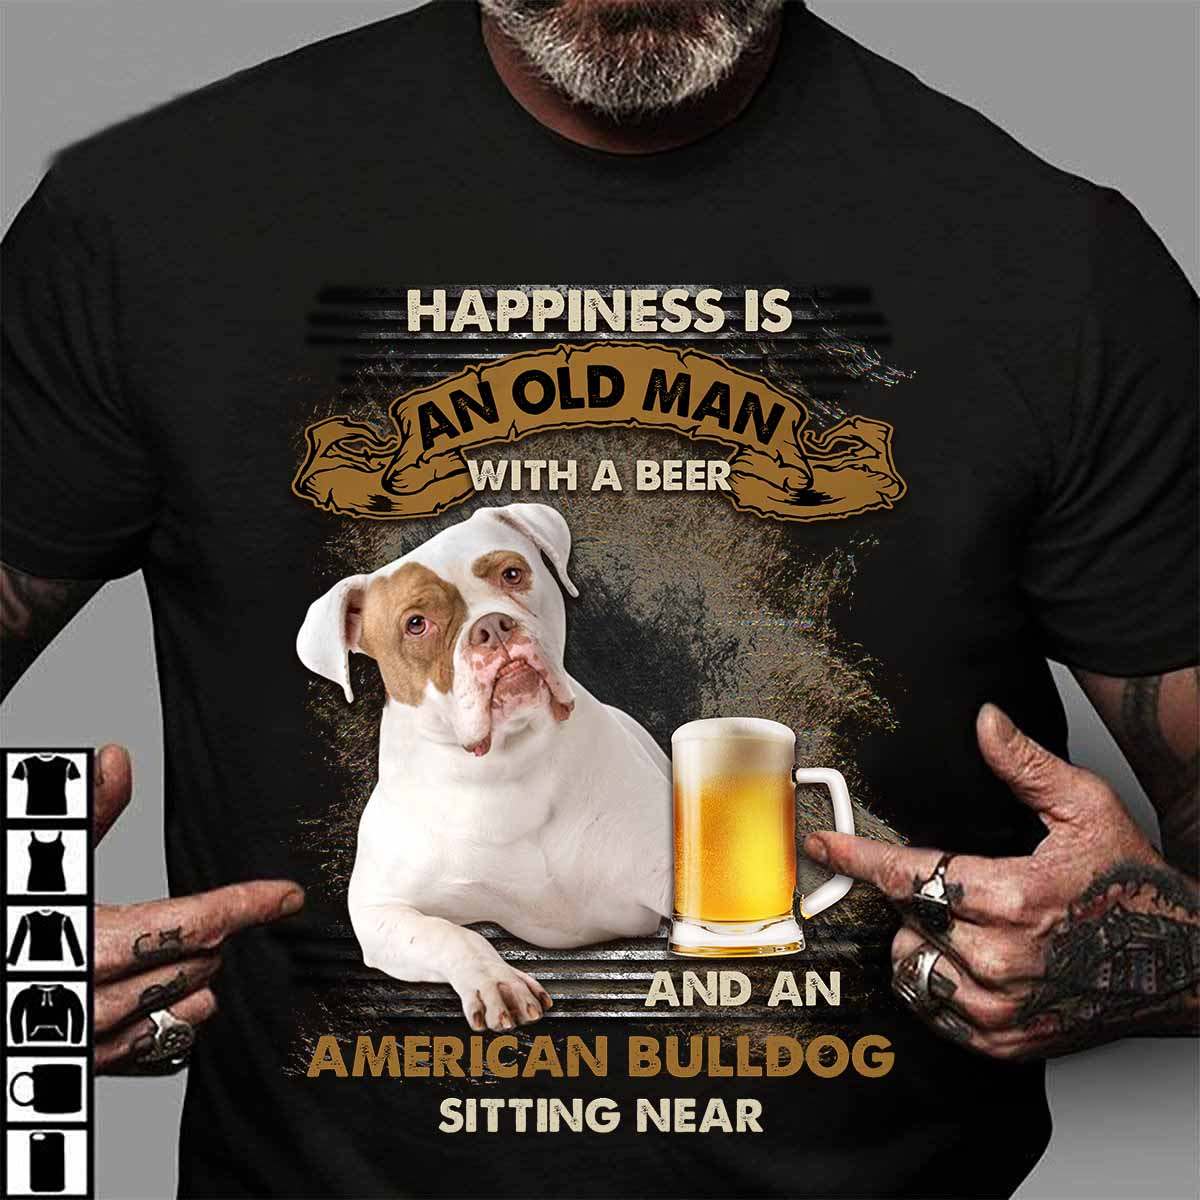 Happiness is an old man with a beer and an American bulldog sitting near